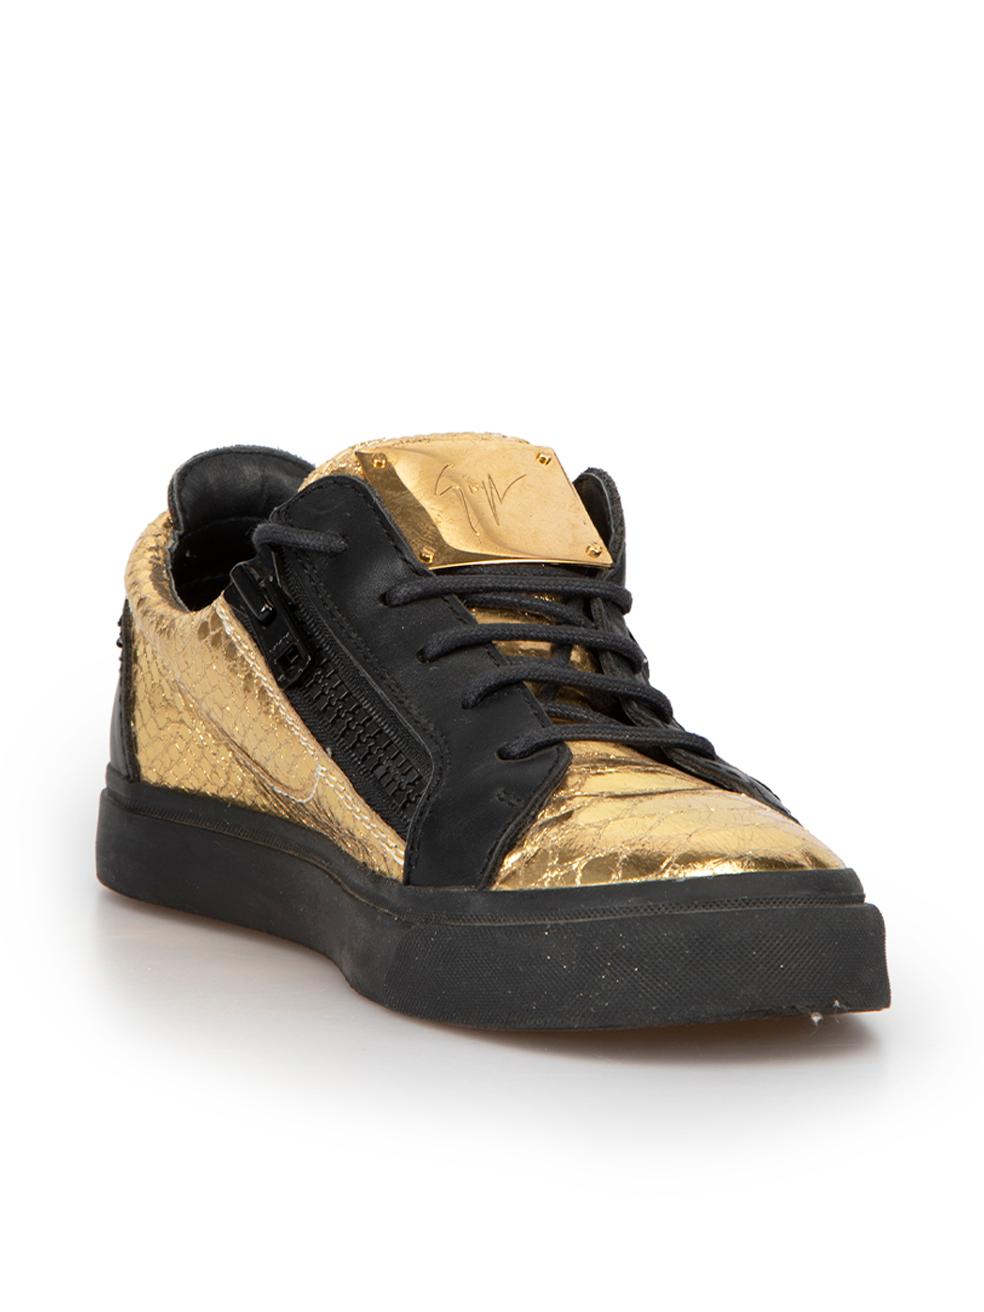 CONDITION is Very good. Hardly any visible wear to shoes is evident on this used Giuseppe Zanotti designer resale item. 



Details


Gold and black

Leather

Low top trainers

Python skin embossed pattern

Round toe

Flatform heel

Lace up